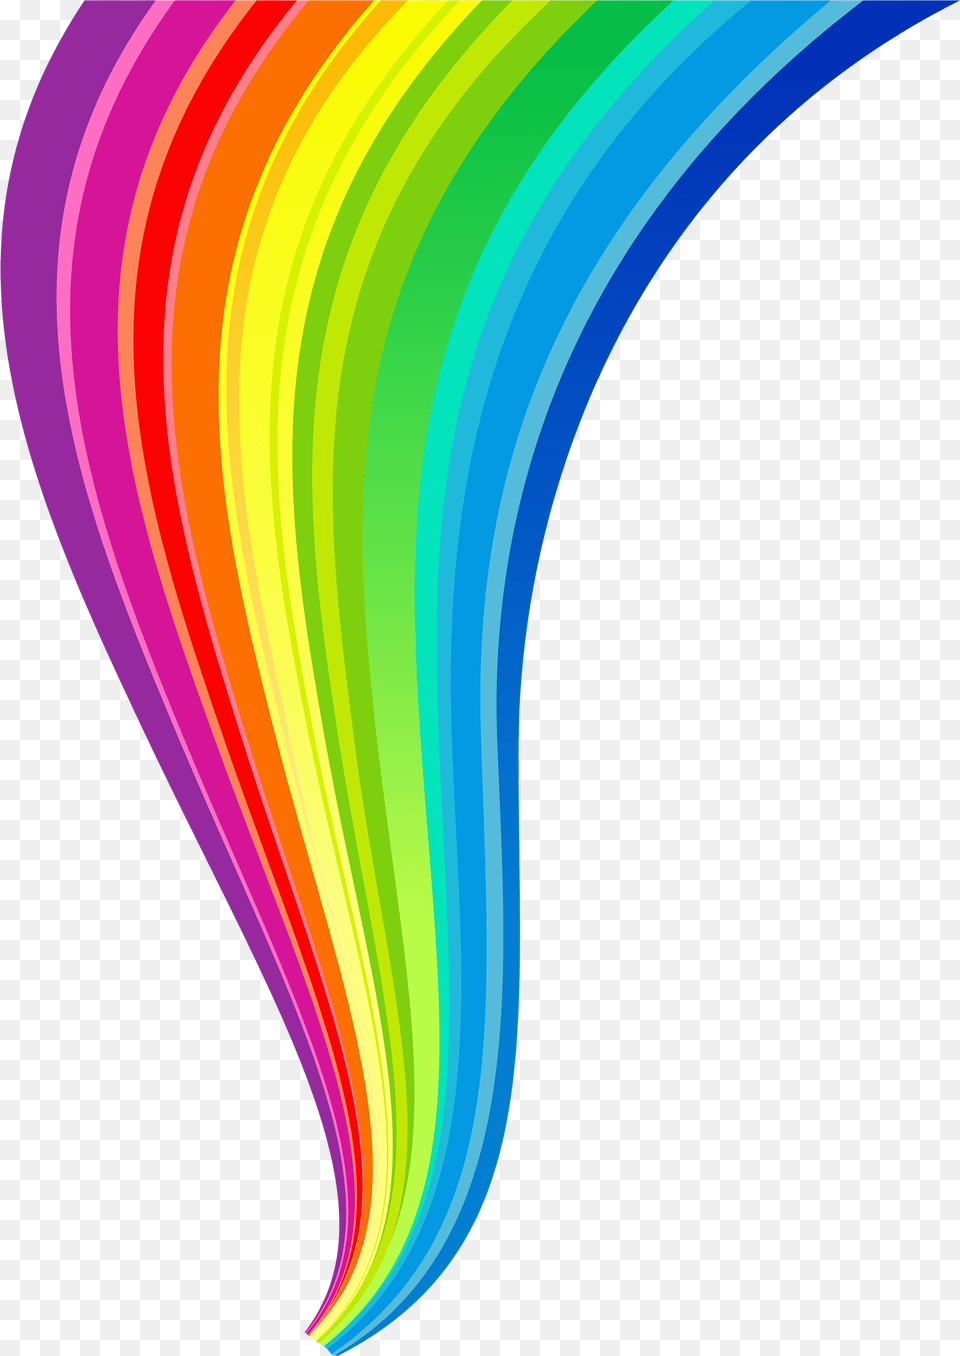 Download Rainbow Image For Rainbow Art, Graphics, Light, Pattern Free Transparent Png